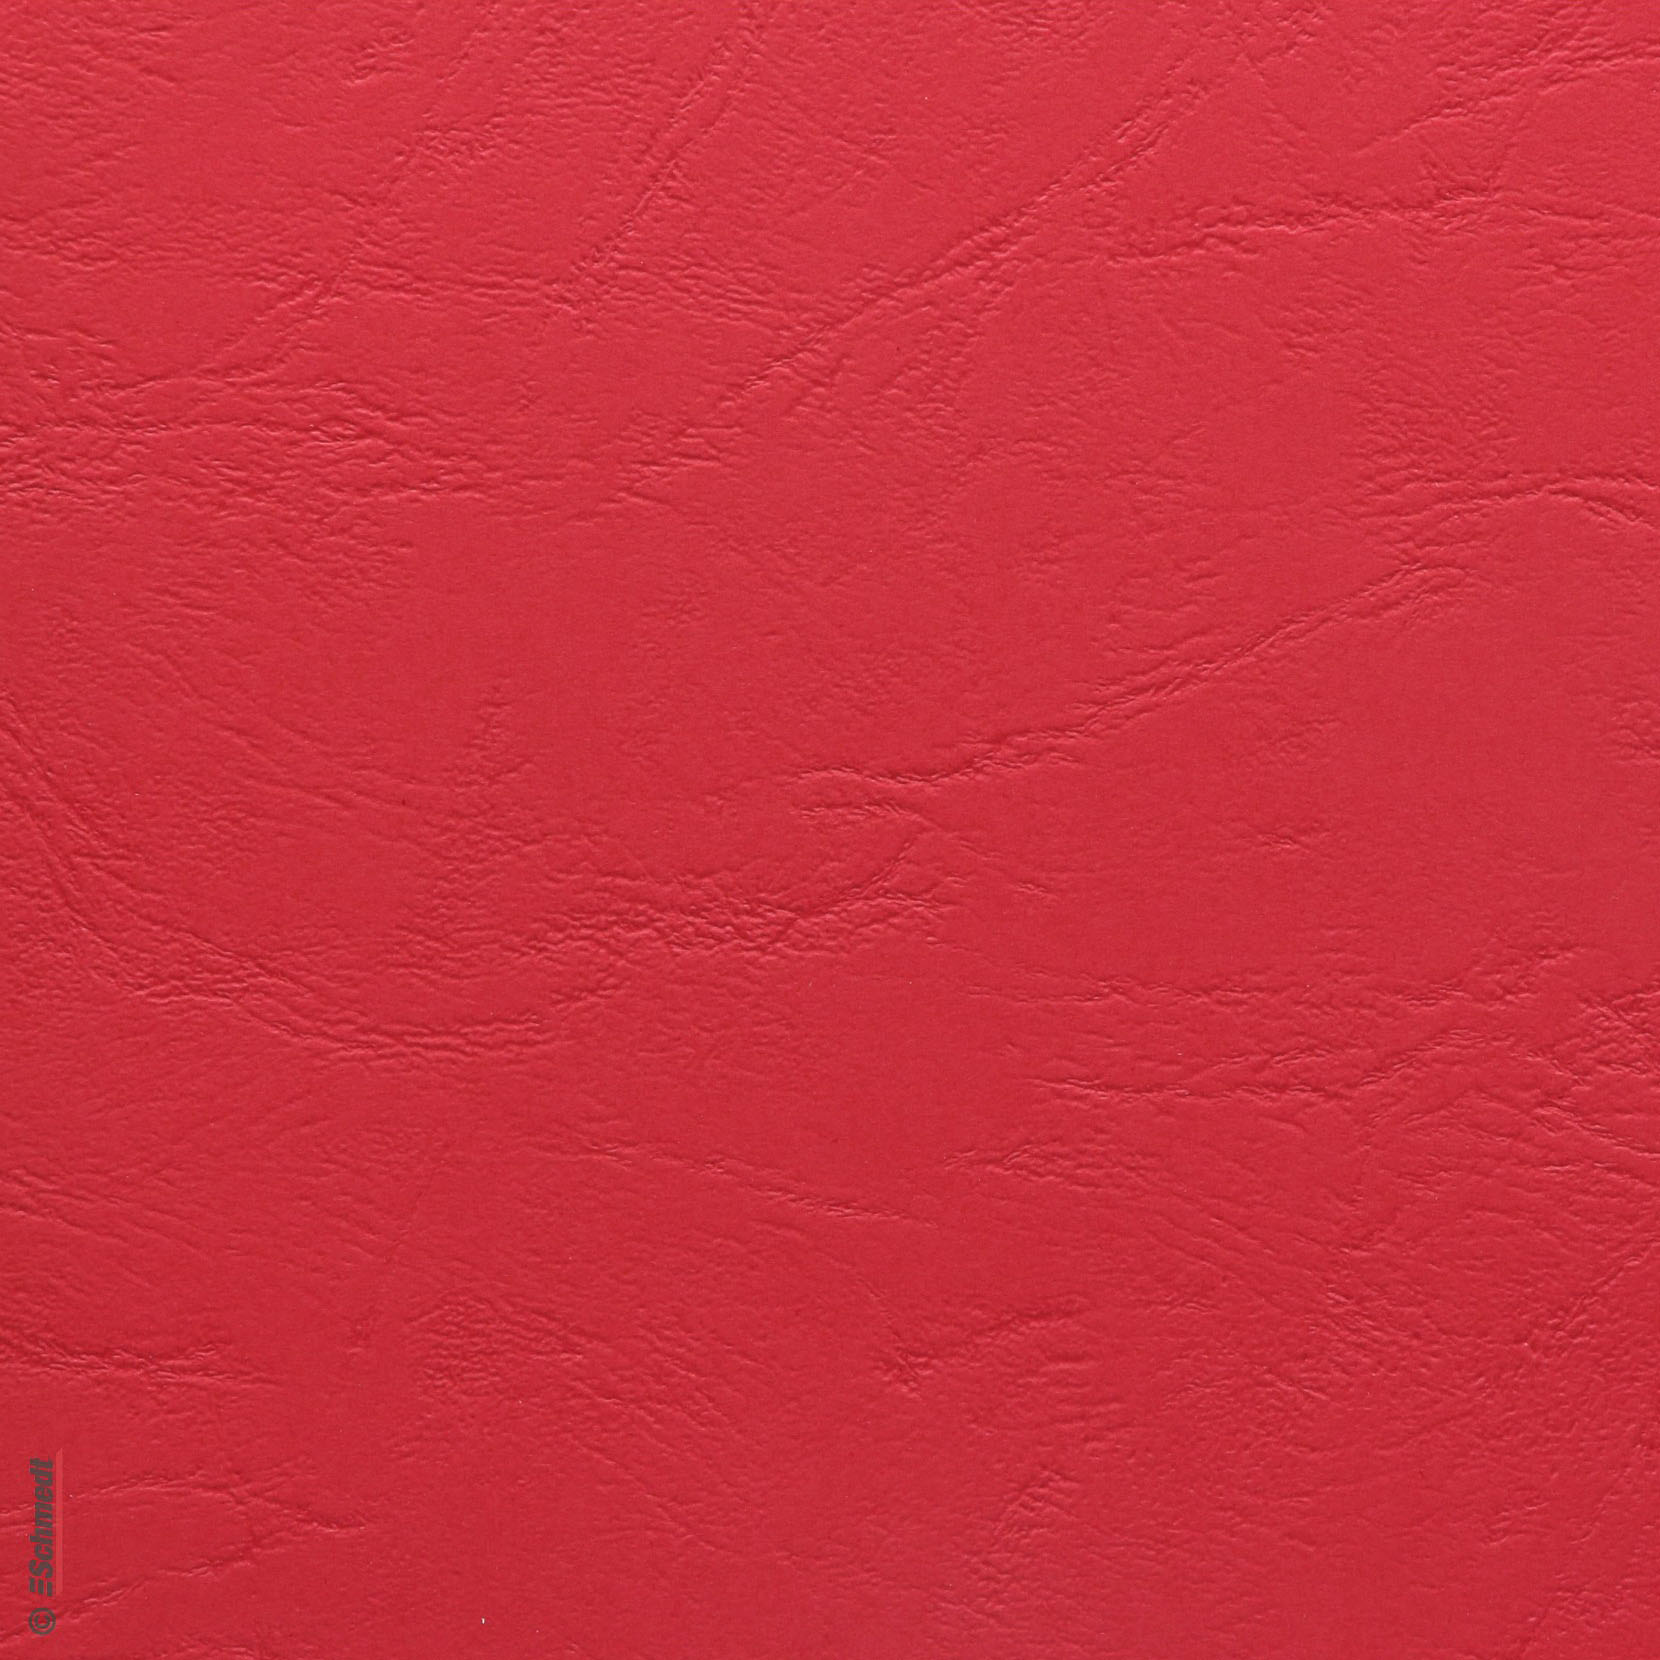 Cover board - leather emboss - Colour 004 - red - used as cover for books and brochures, for folders, model making, greeting cards or tinker...